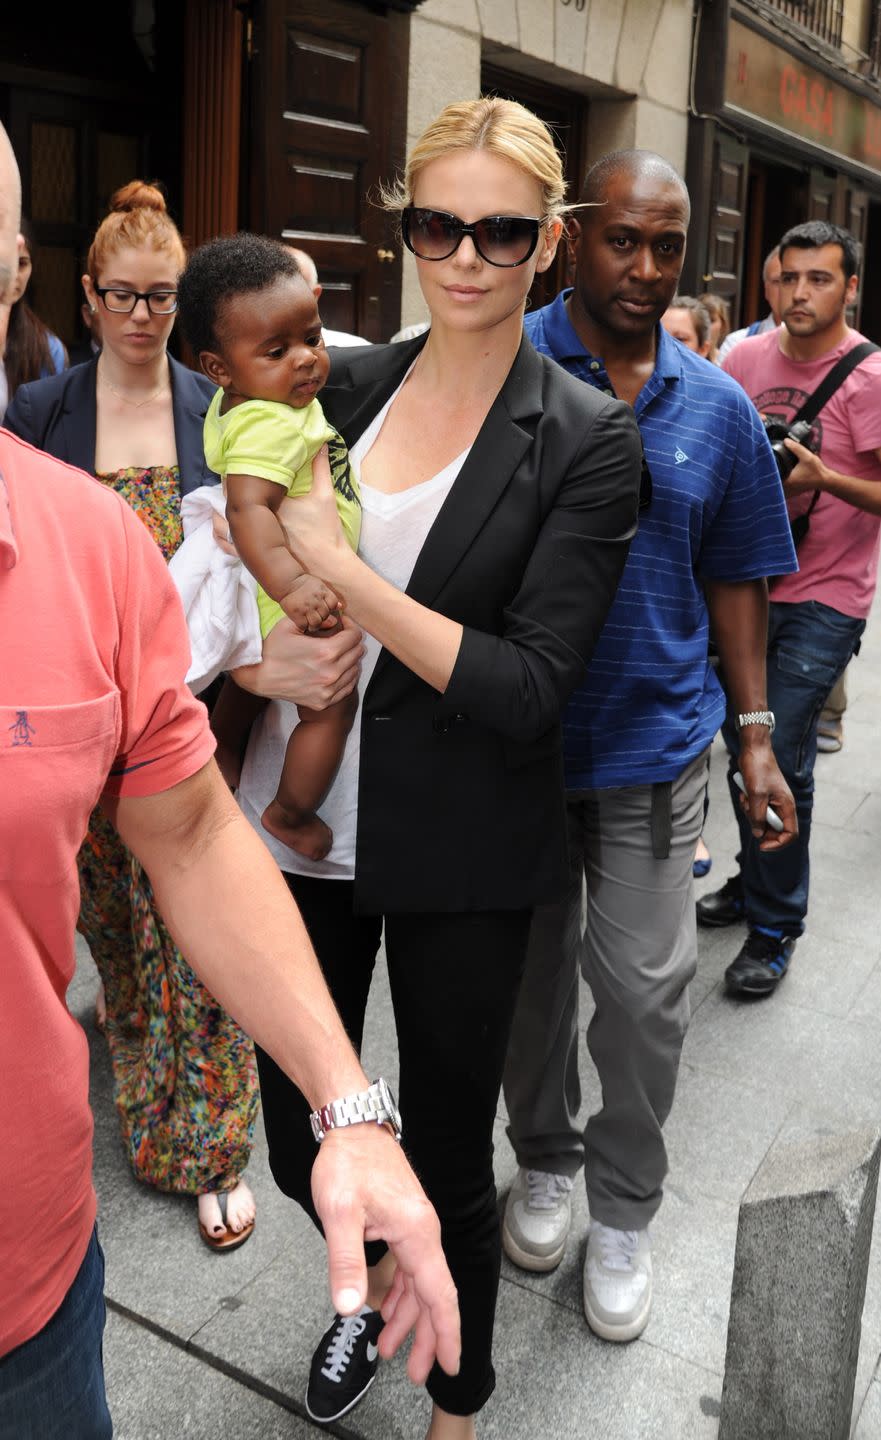 charlize theron and baby sighting in madrid may 17, 2012